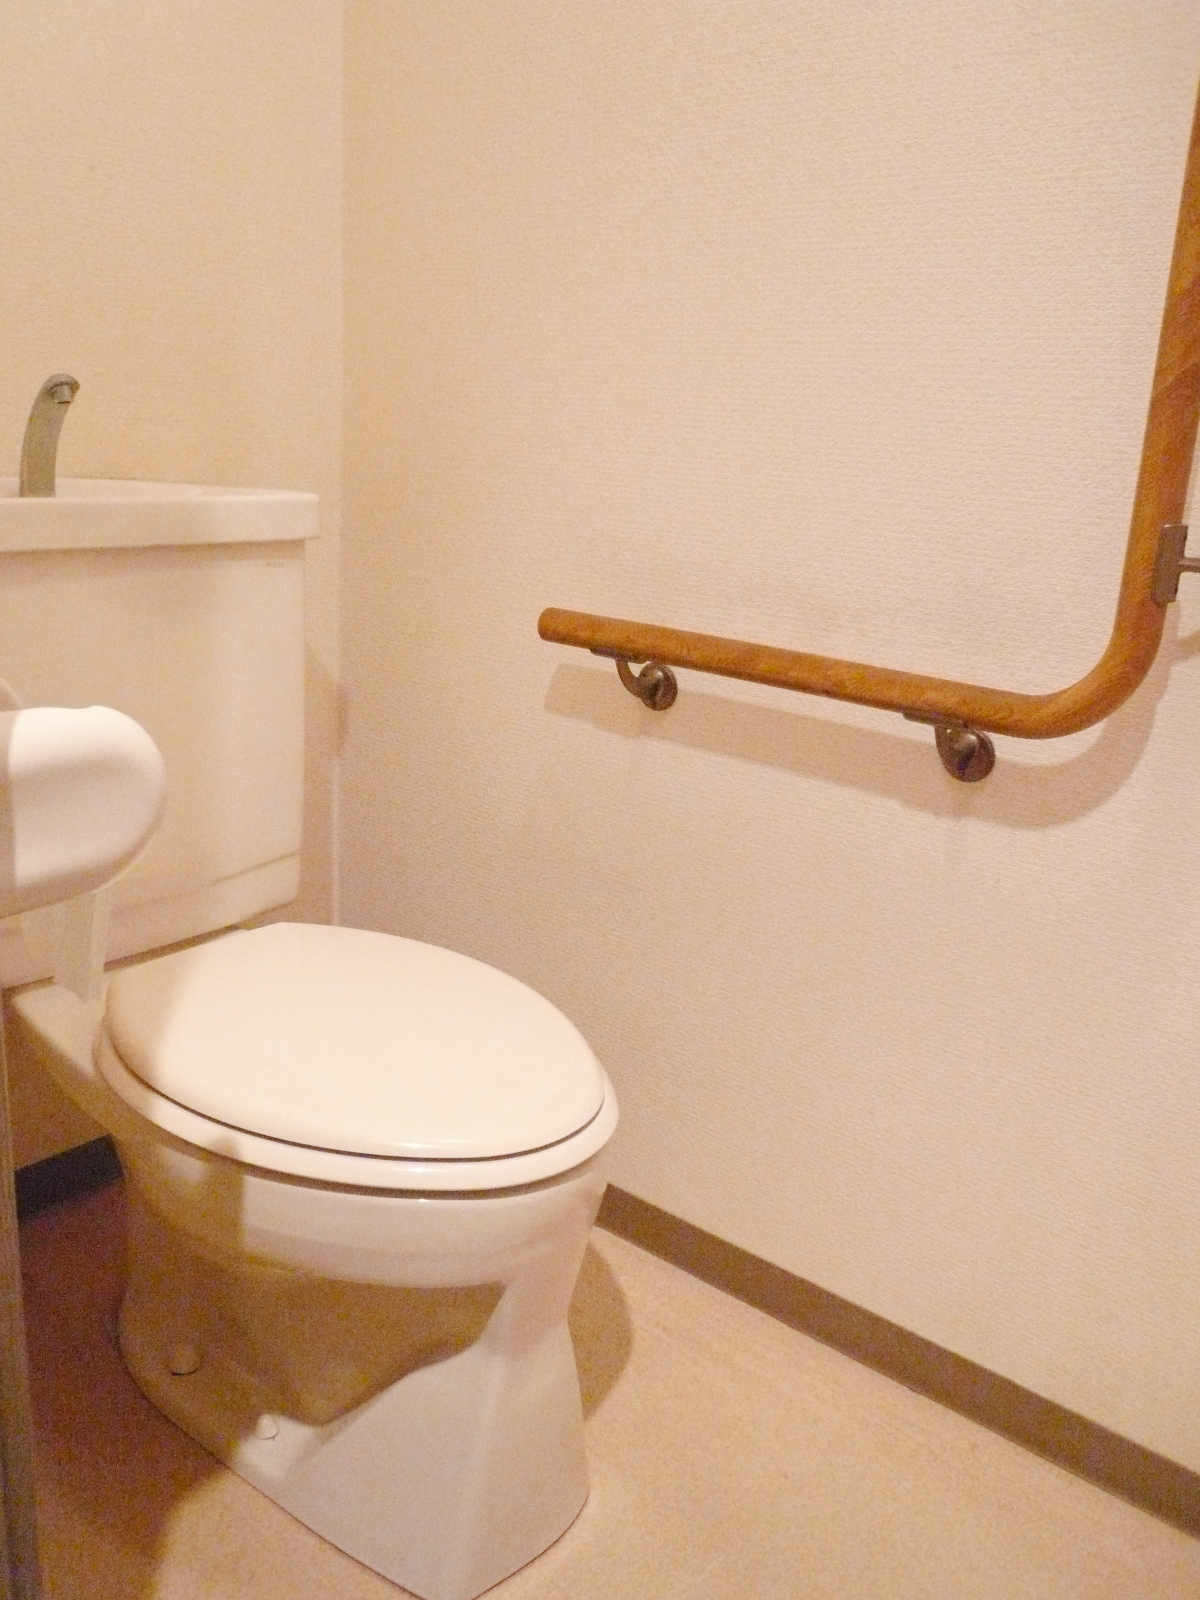 Toilet. toilet  The same type ・ It will be in a separate dwelling unit photos. 